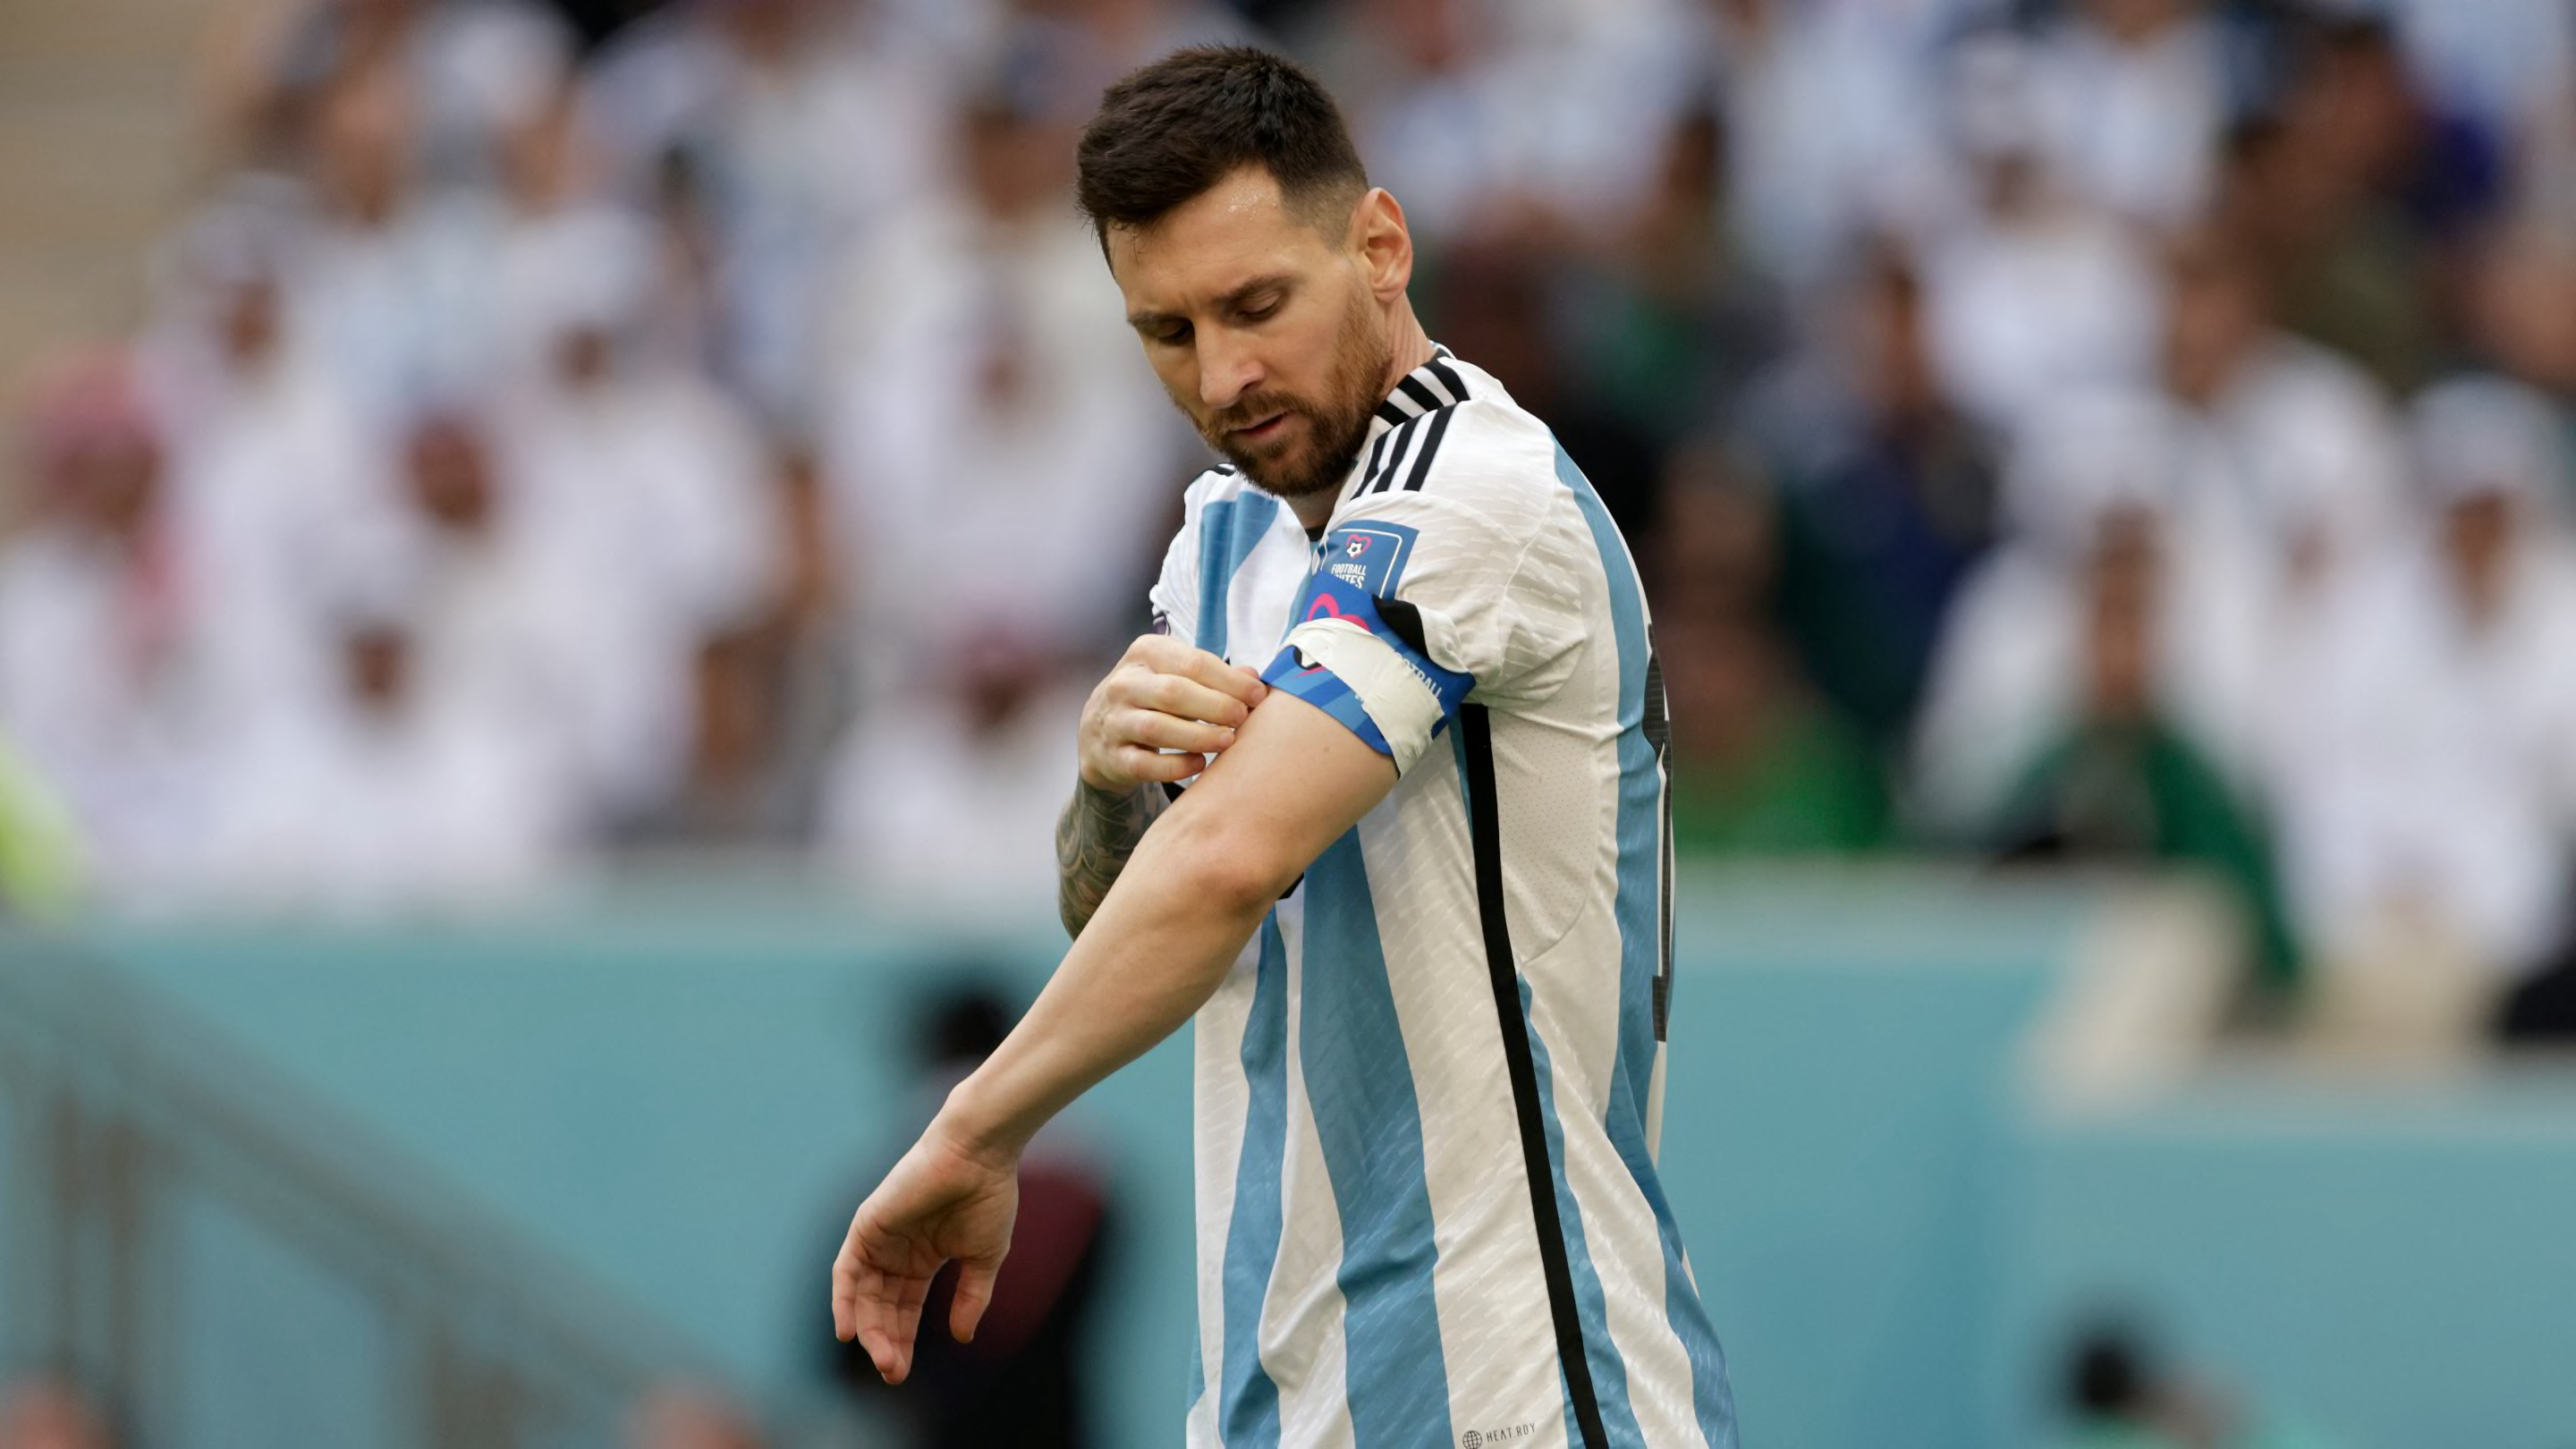 Lionel Scaloni provides update on Lionel Messi after missed training session